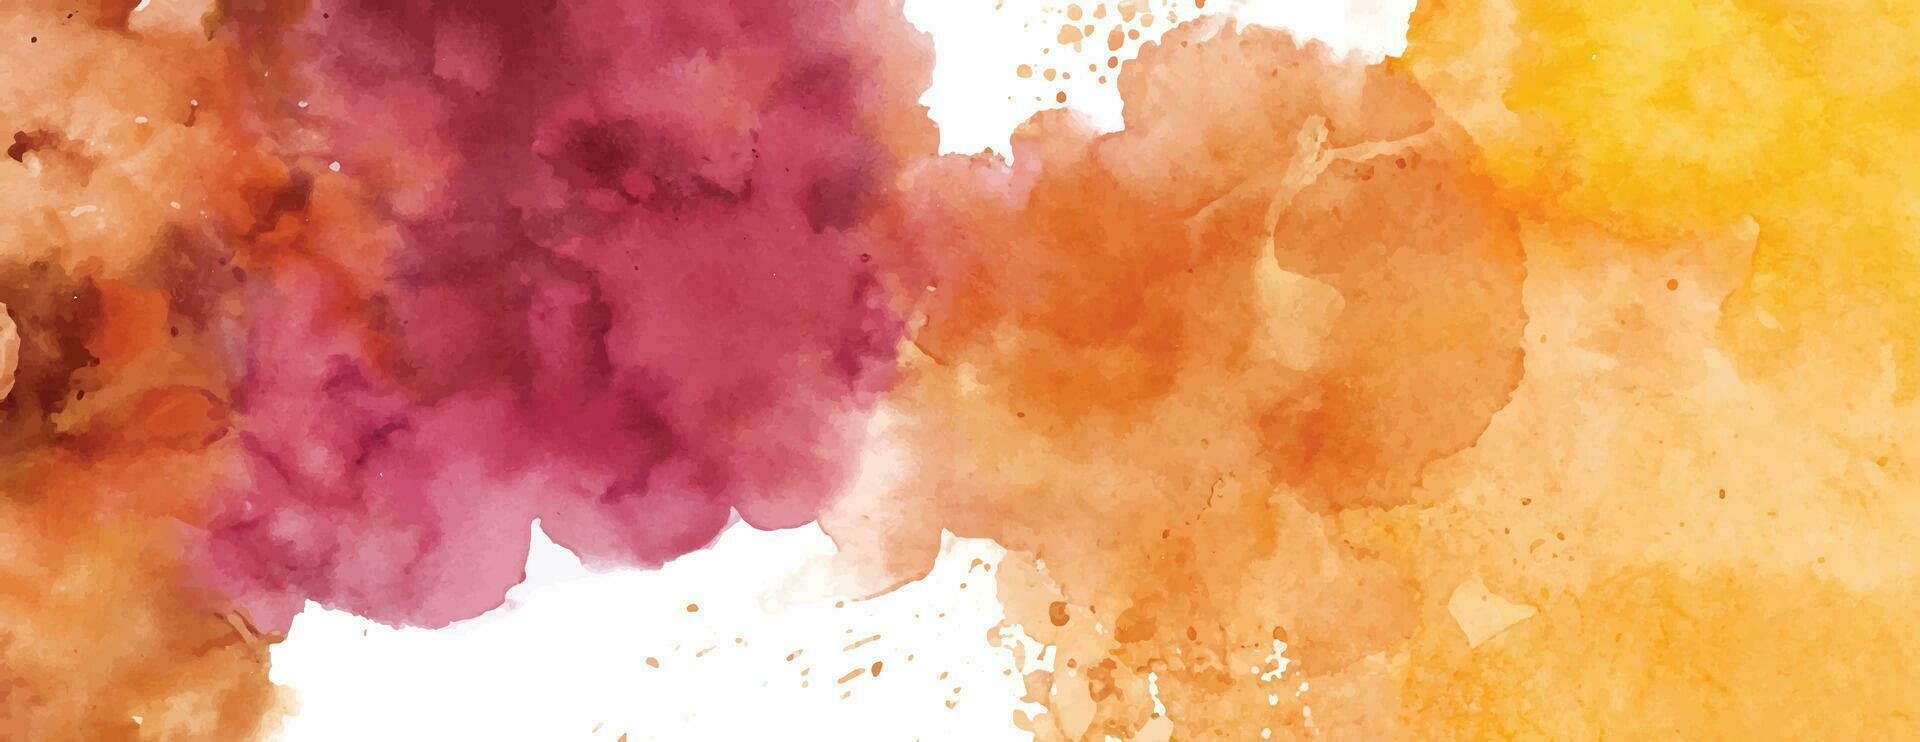 watercolour with splash spot background white copy space vector